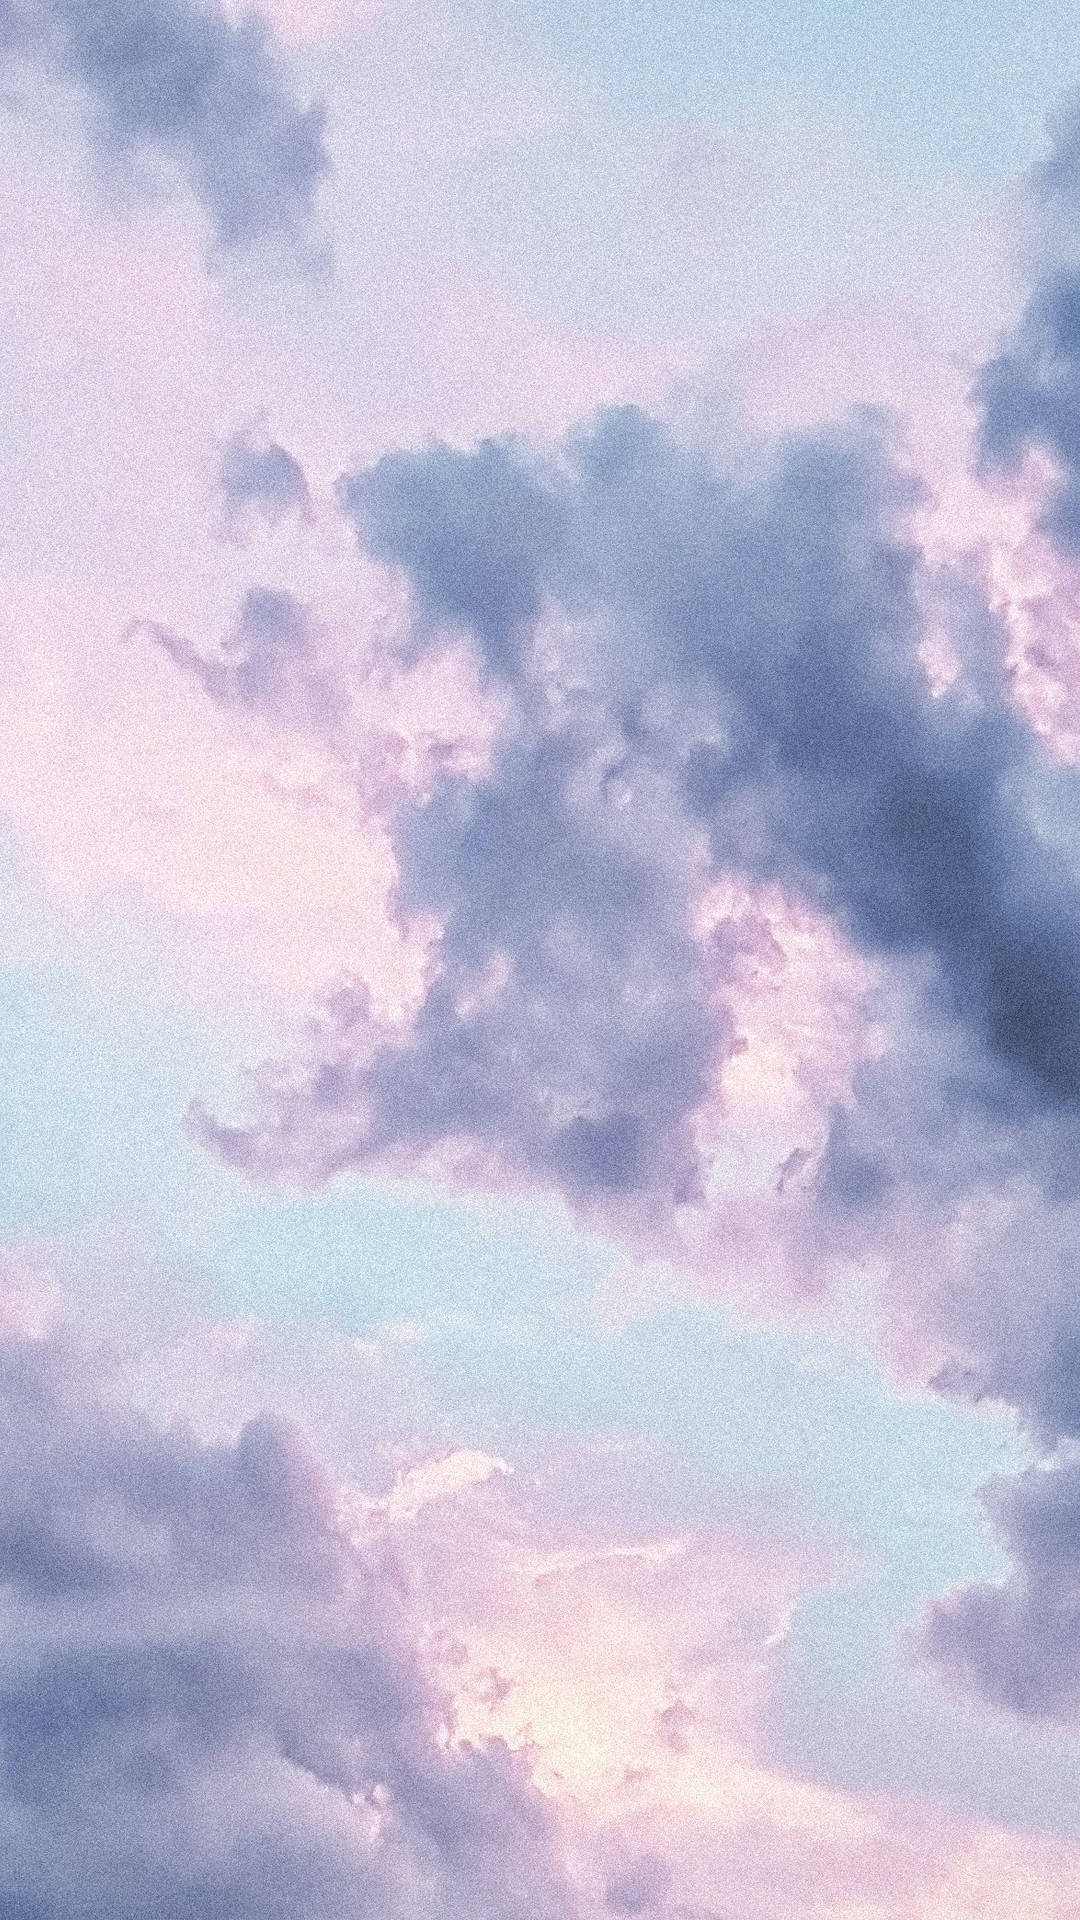 Serene Sky - A Portrait of Gray, Pink, and Blue Clouds Wallpaper